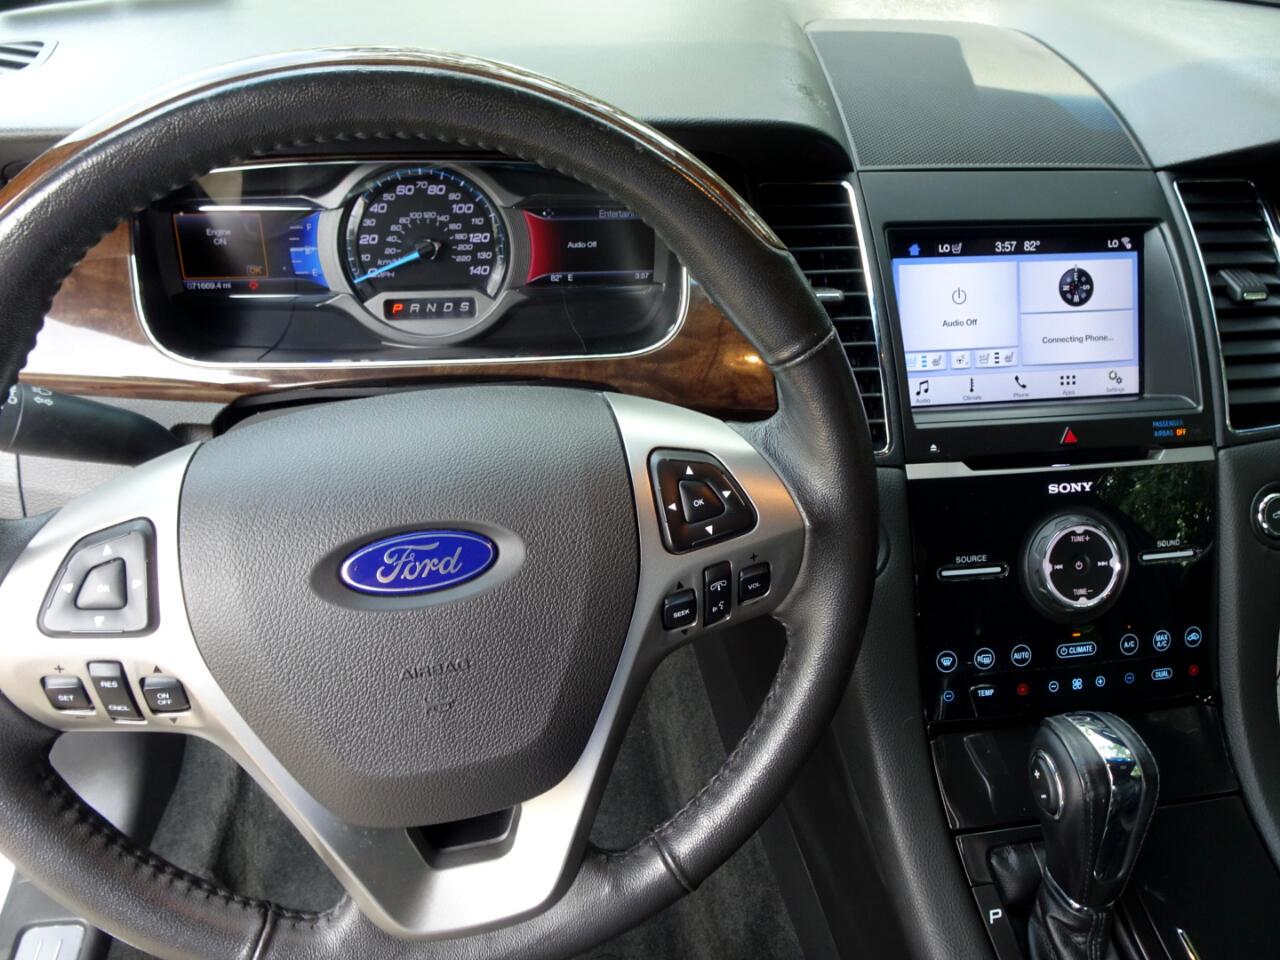 Details more than 120 2016 ford taurus interior best